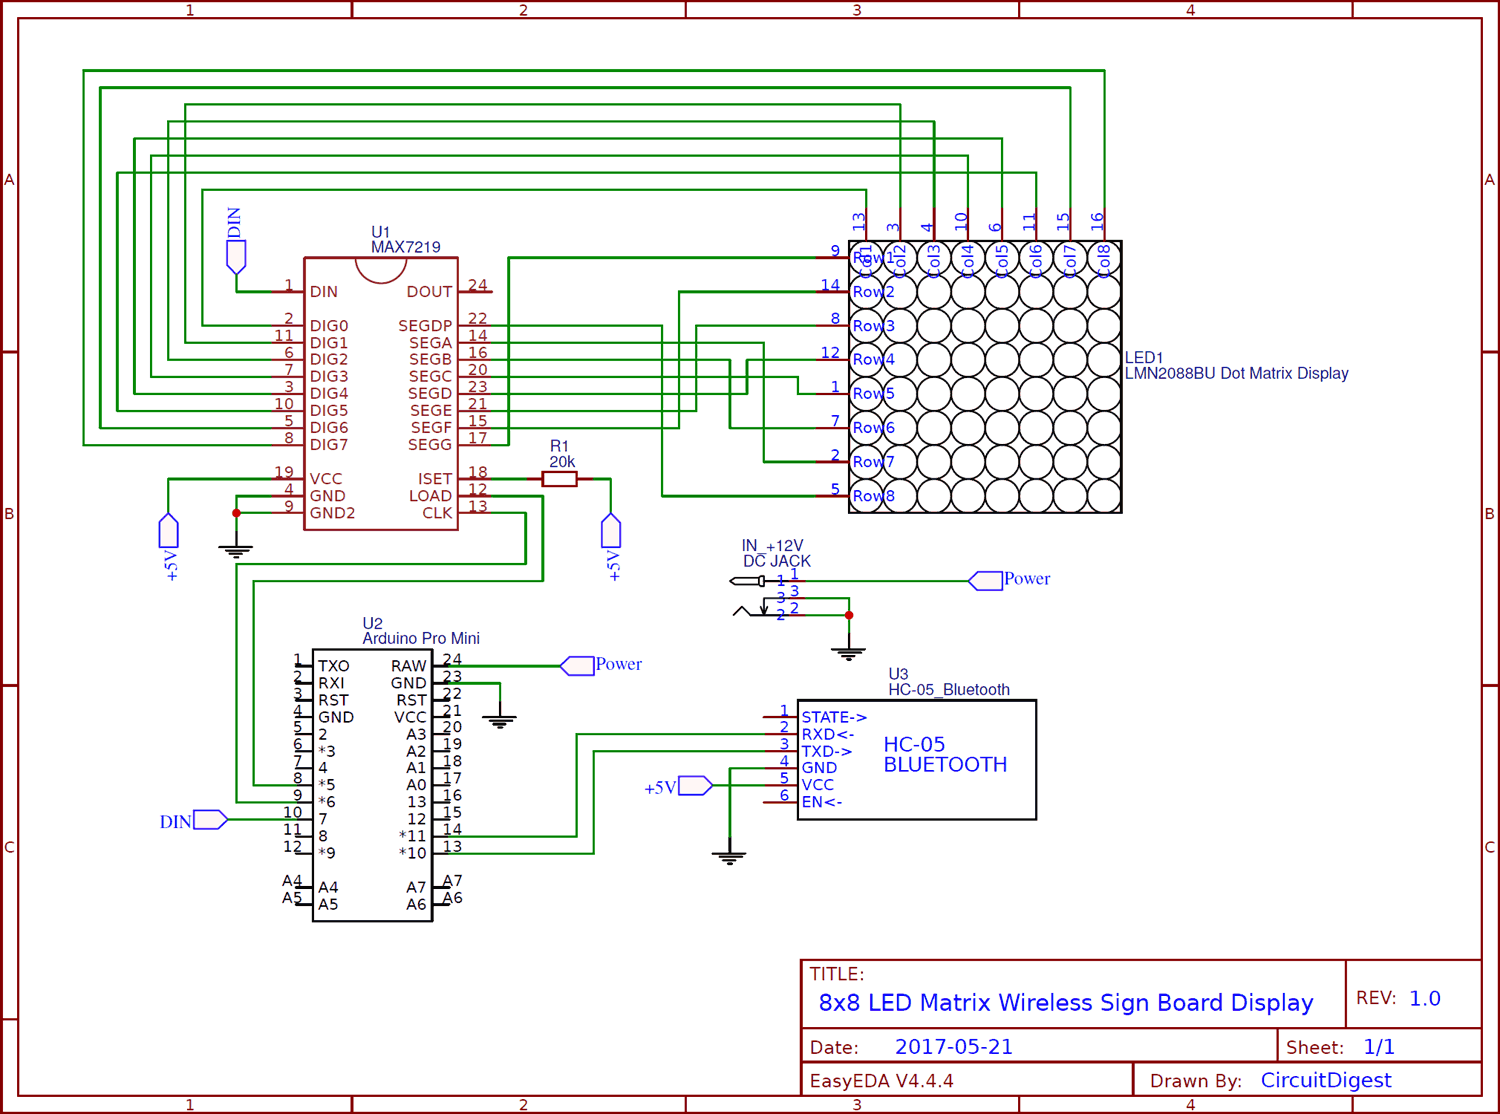 Circuit diagram for Bluetooth Controlled 8x8 LED Wireless Sign Board Display using Arduino